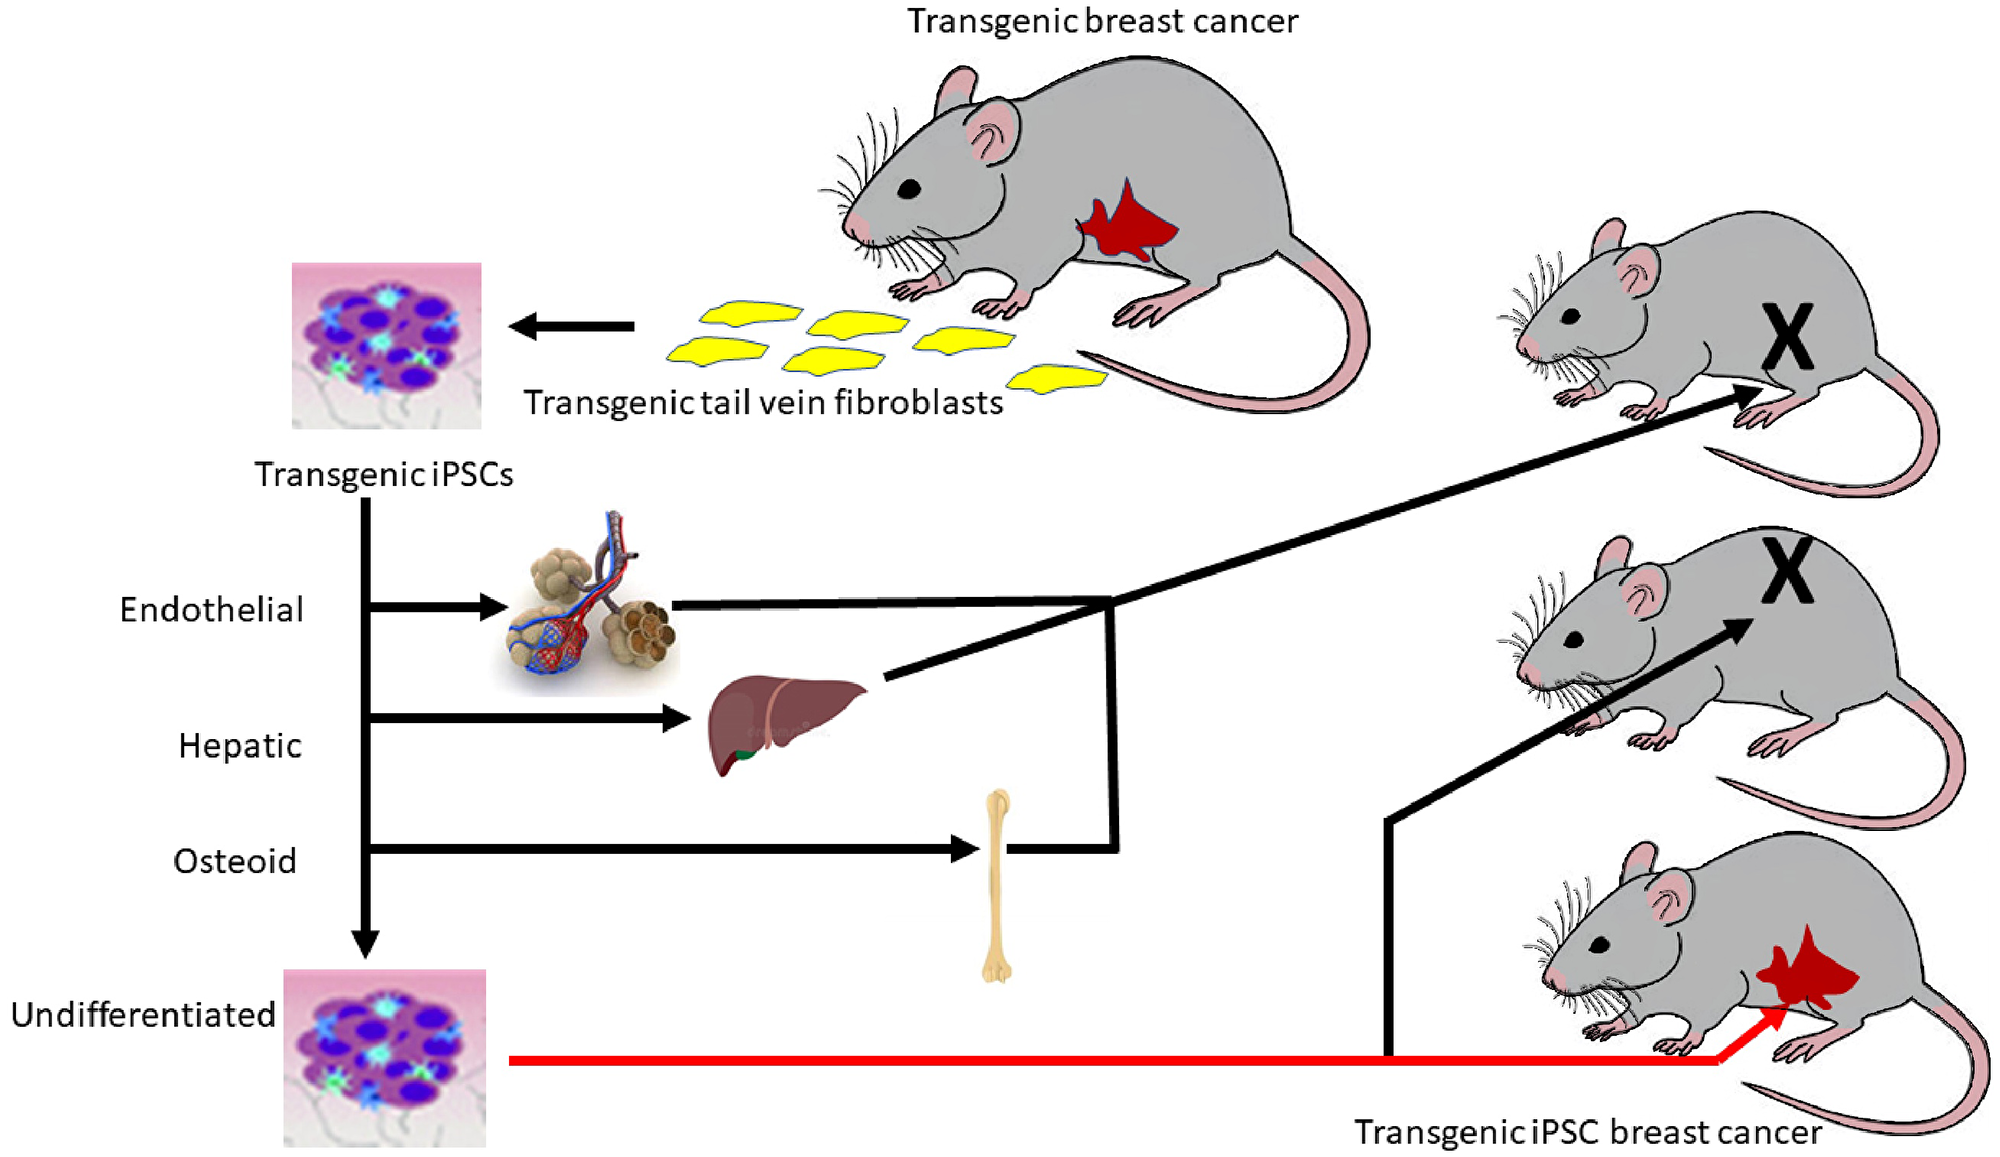 Regulation of oncogenesis by a critical window of differentiation.